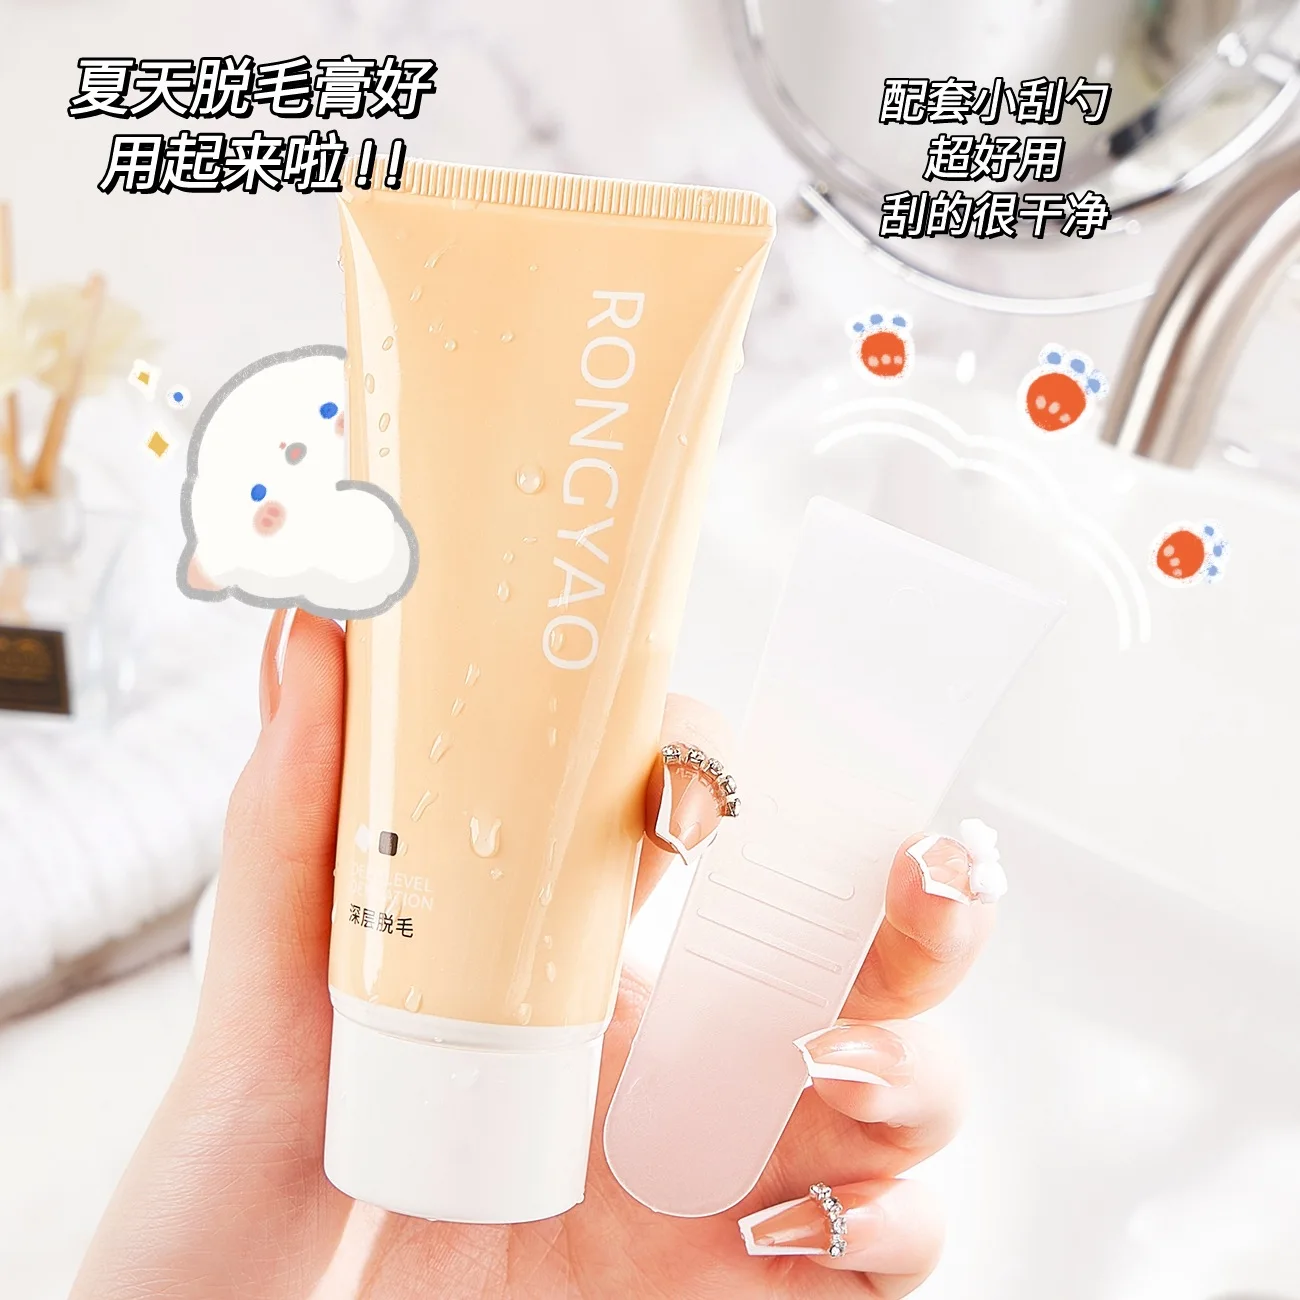 60g Deep Depilatory Cream Mild Depilated Non Irritating Hair Removal Cream Arm Armpit and Private Care Female Hair Removal Cream